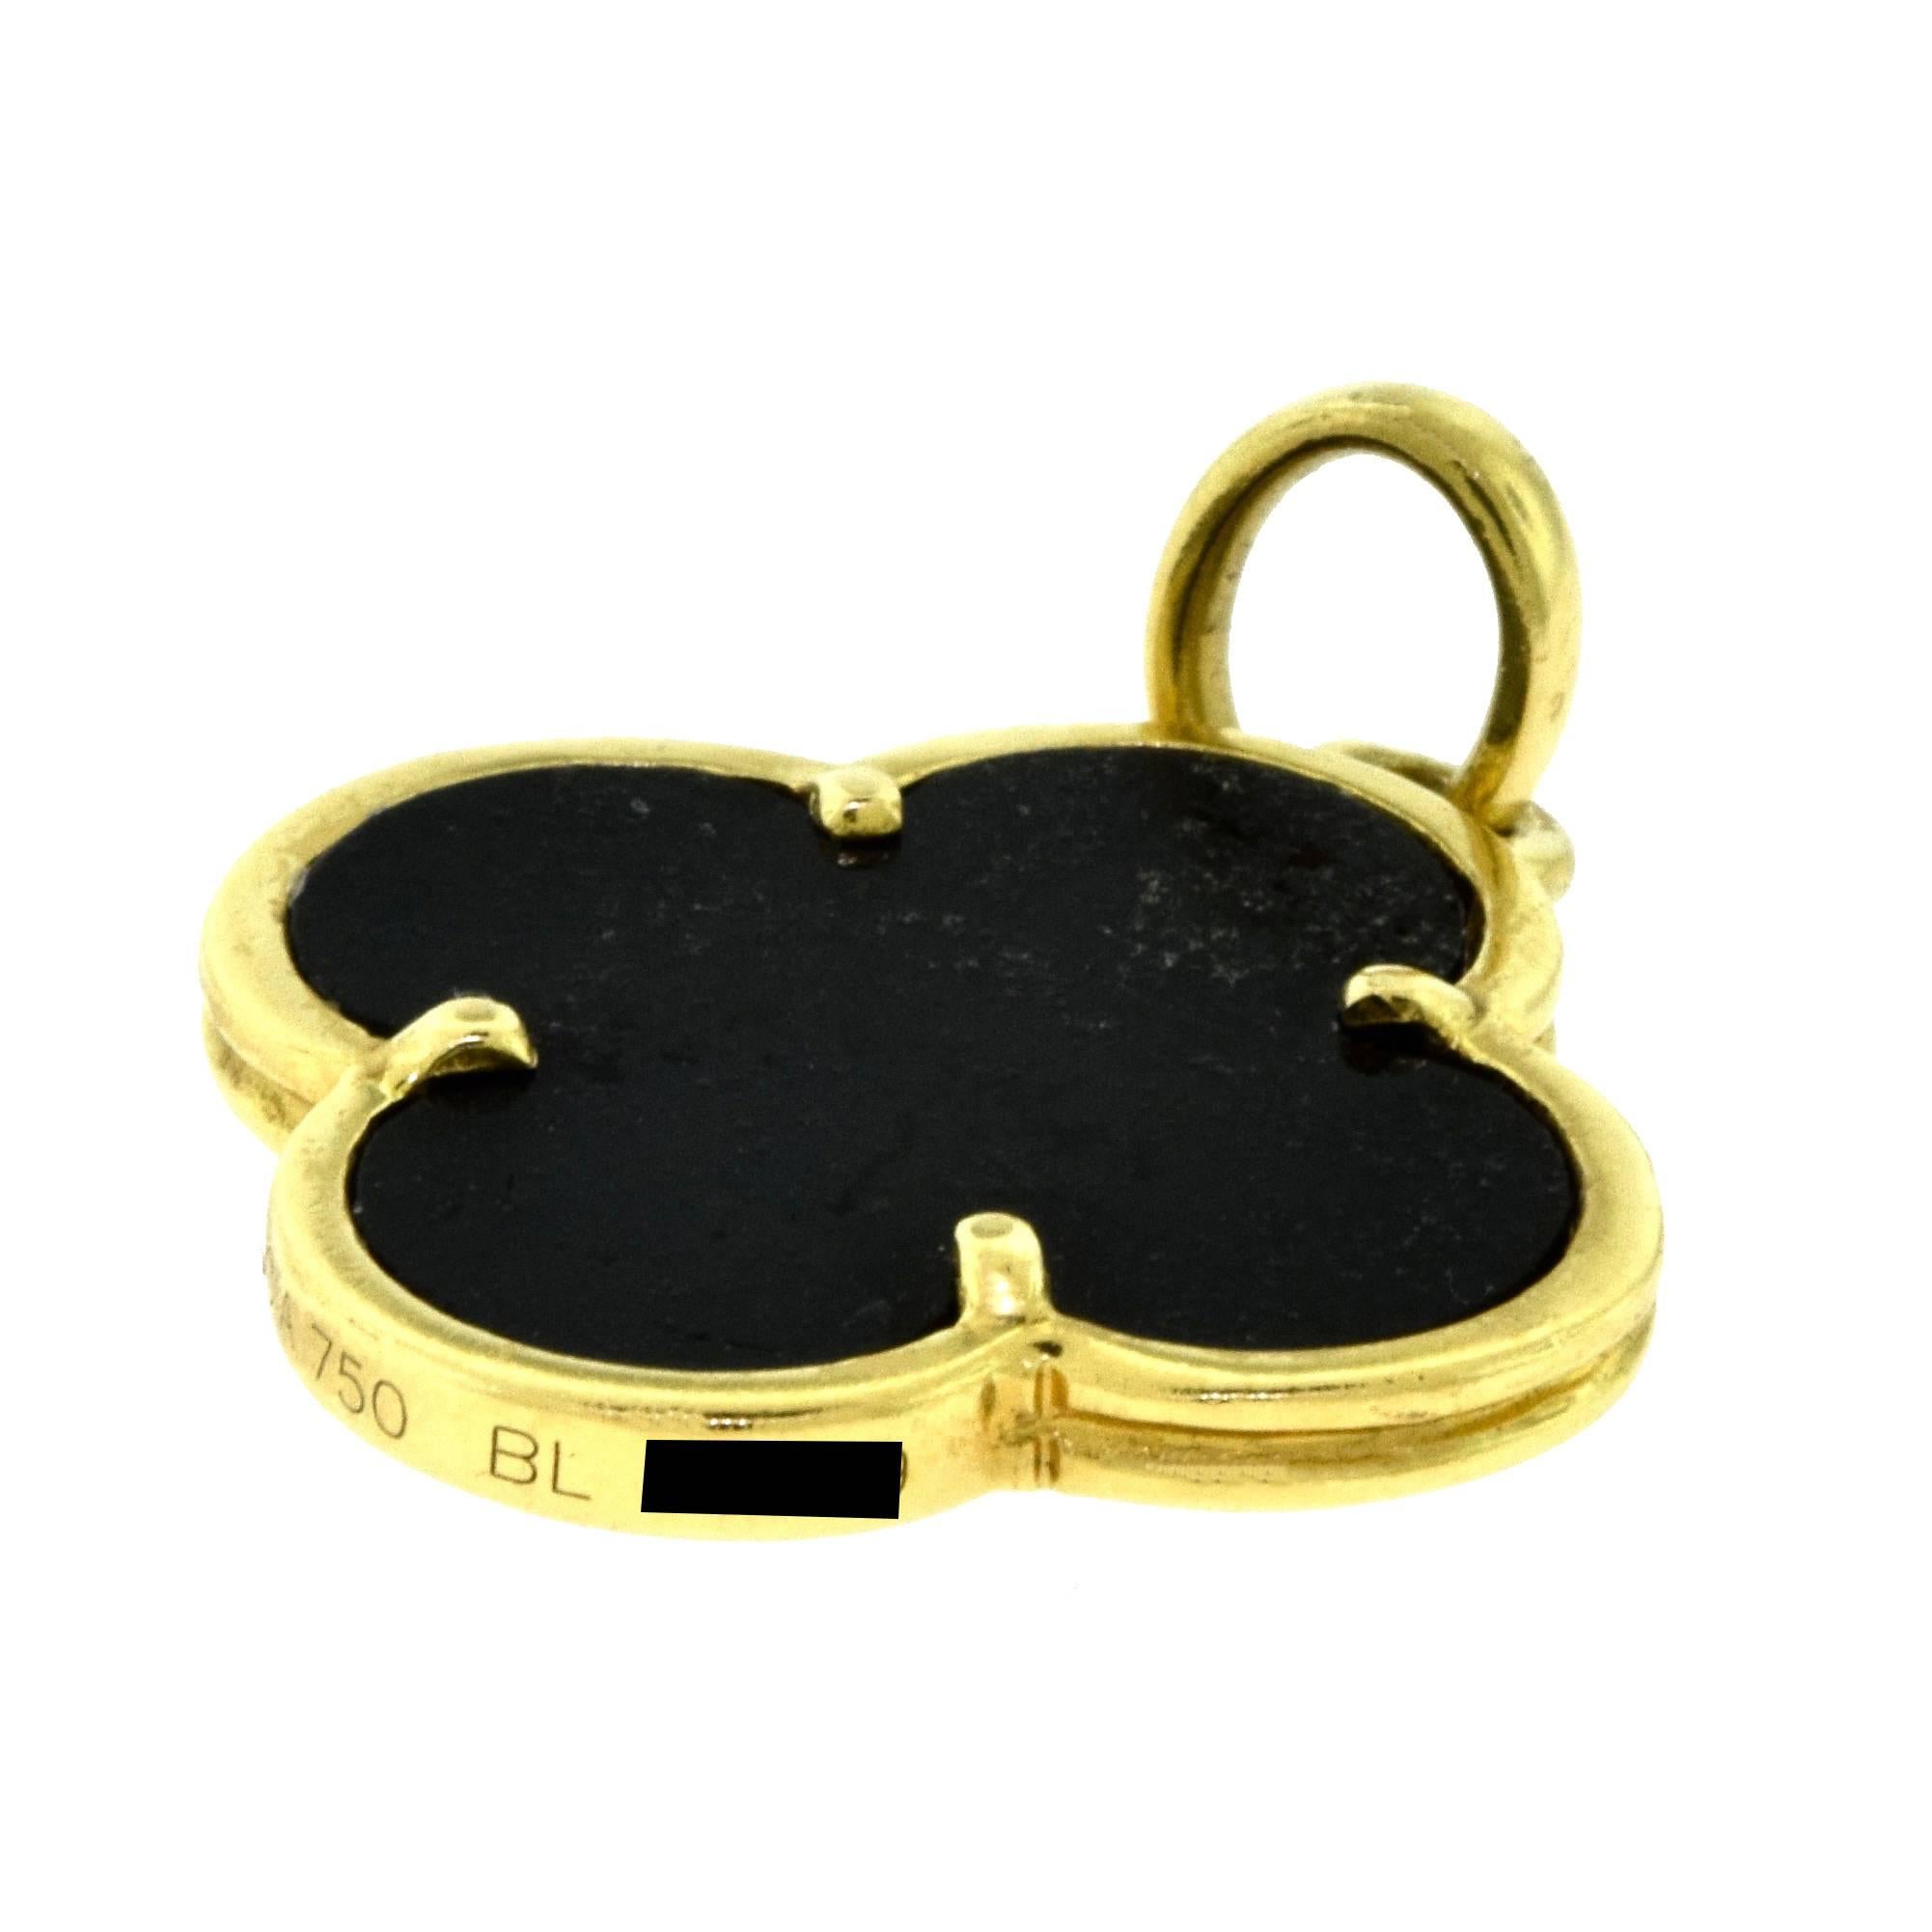 Van Cleef & Arpels Black Onyx Magic Alhambra Gold Pendant Charm In Excellent Condition For Sale In Miami, FL